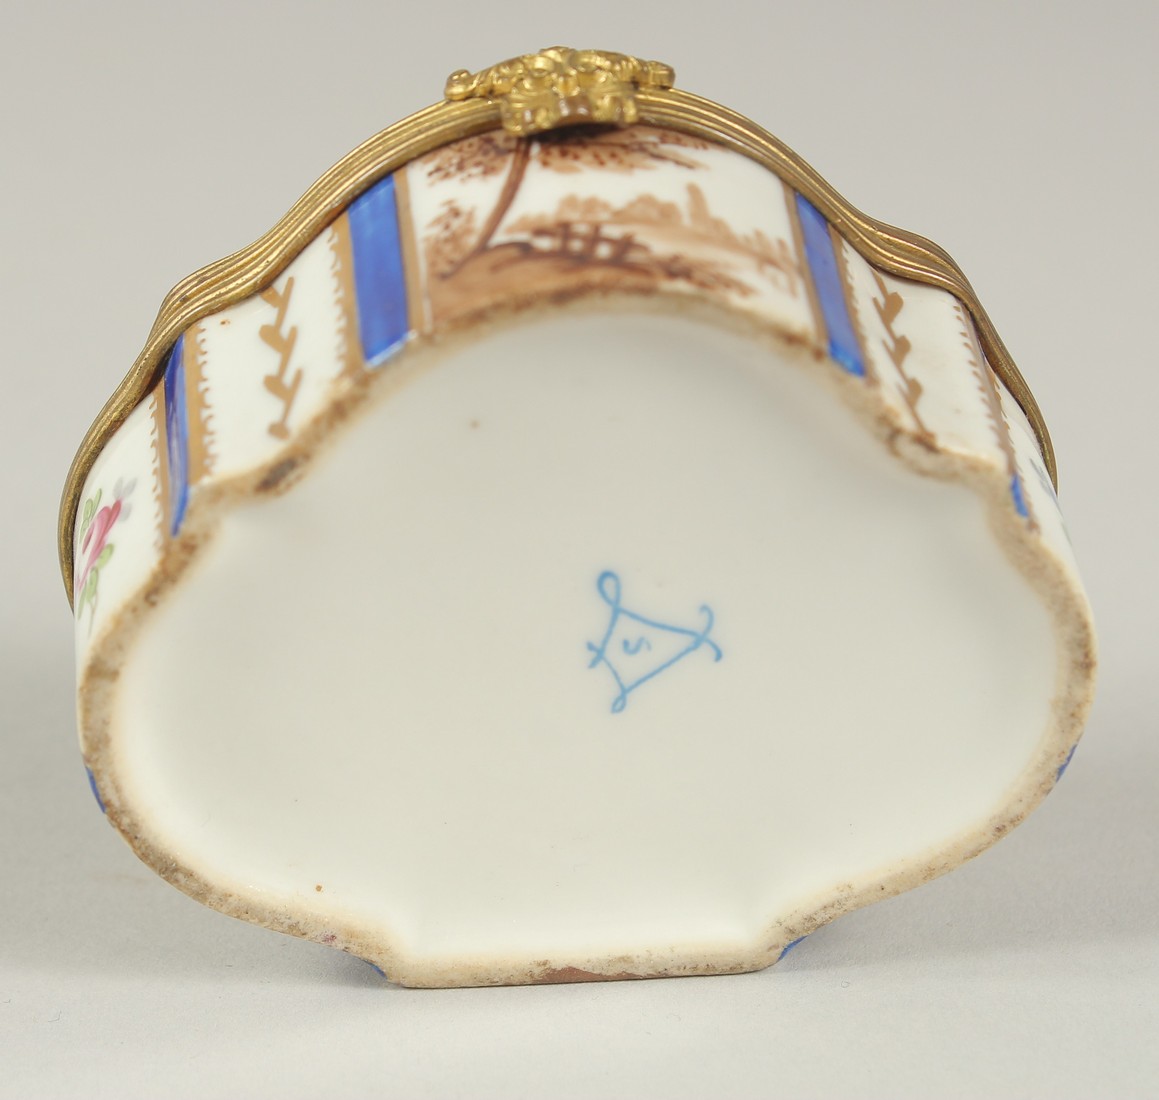 A SMALL SEVRES PORCELAIN PILL BOX AND COVER with blue and white decoration and roses. 3ins wide. - Image 3 of 3